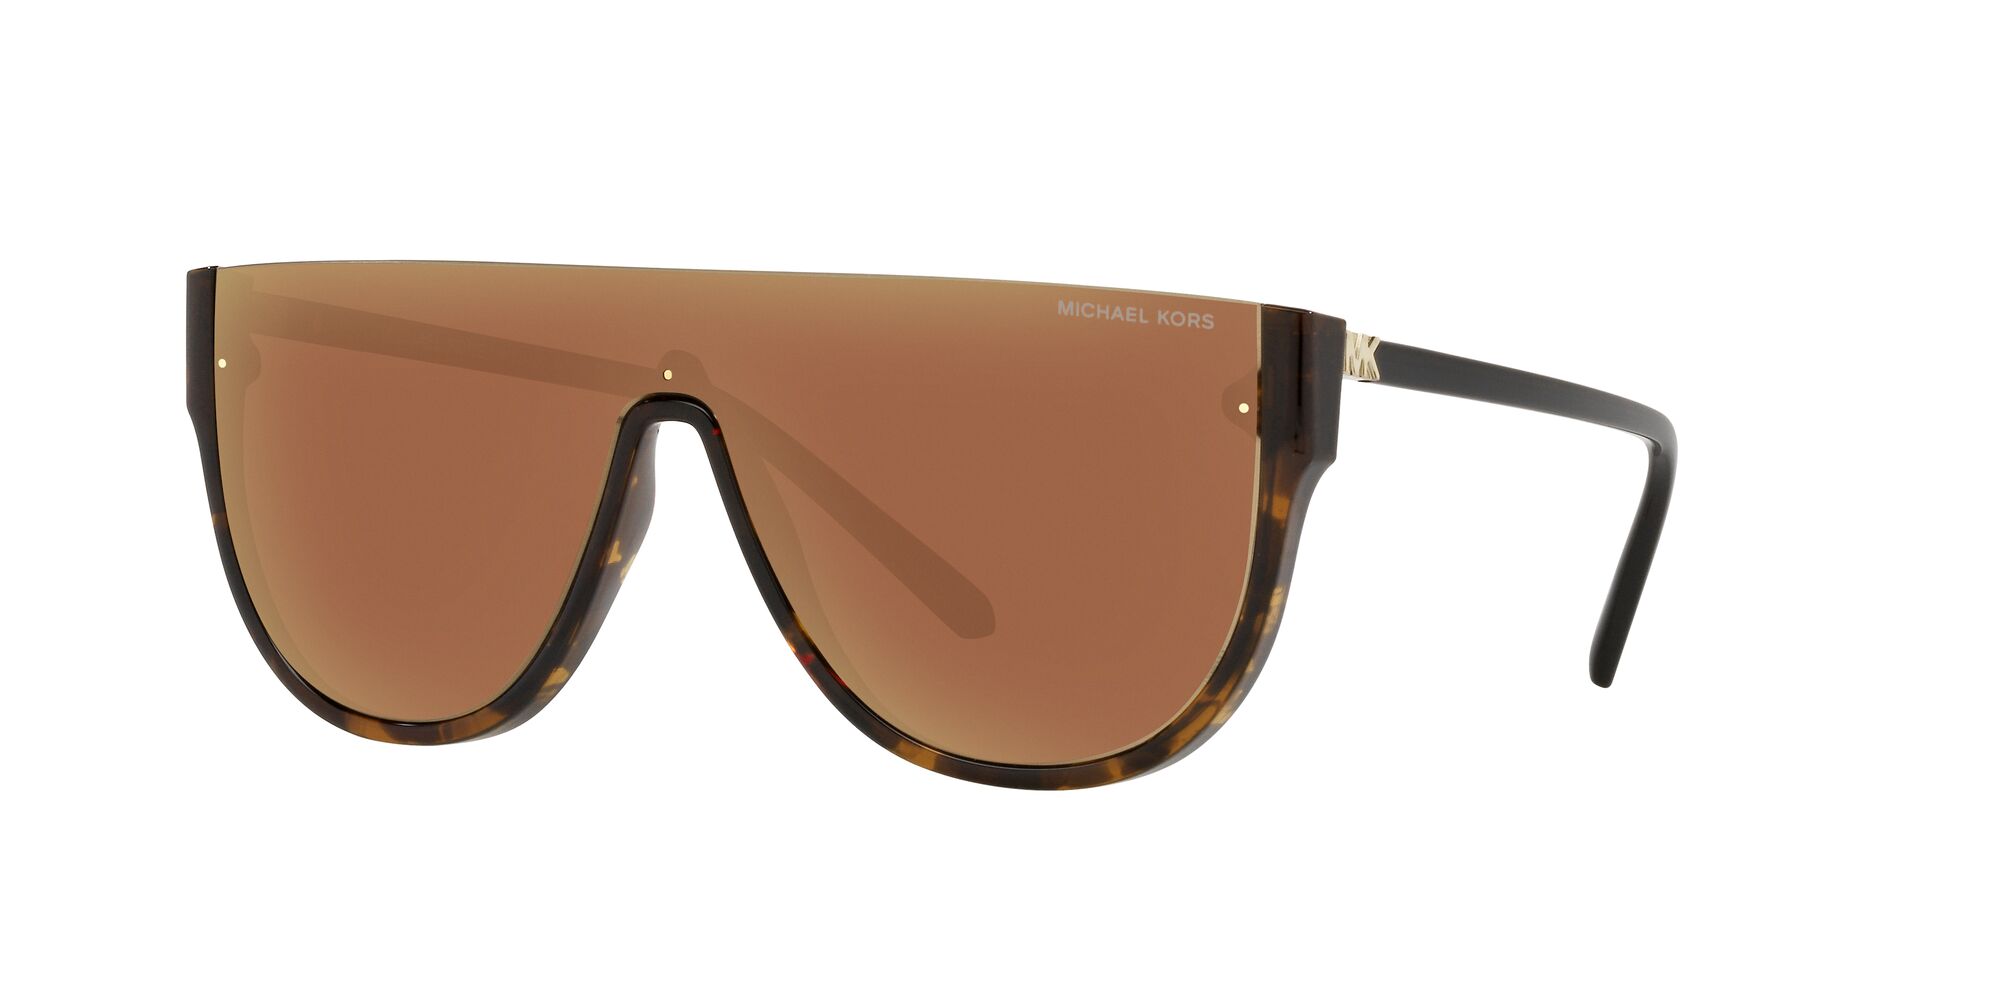 Sunglass Hut® South Africa Online Store | Products